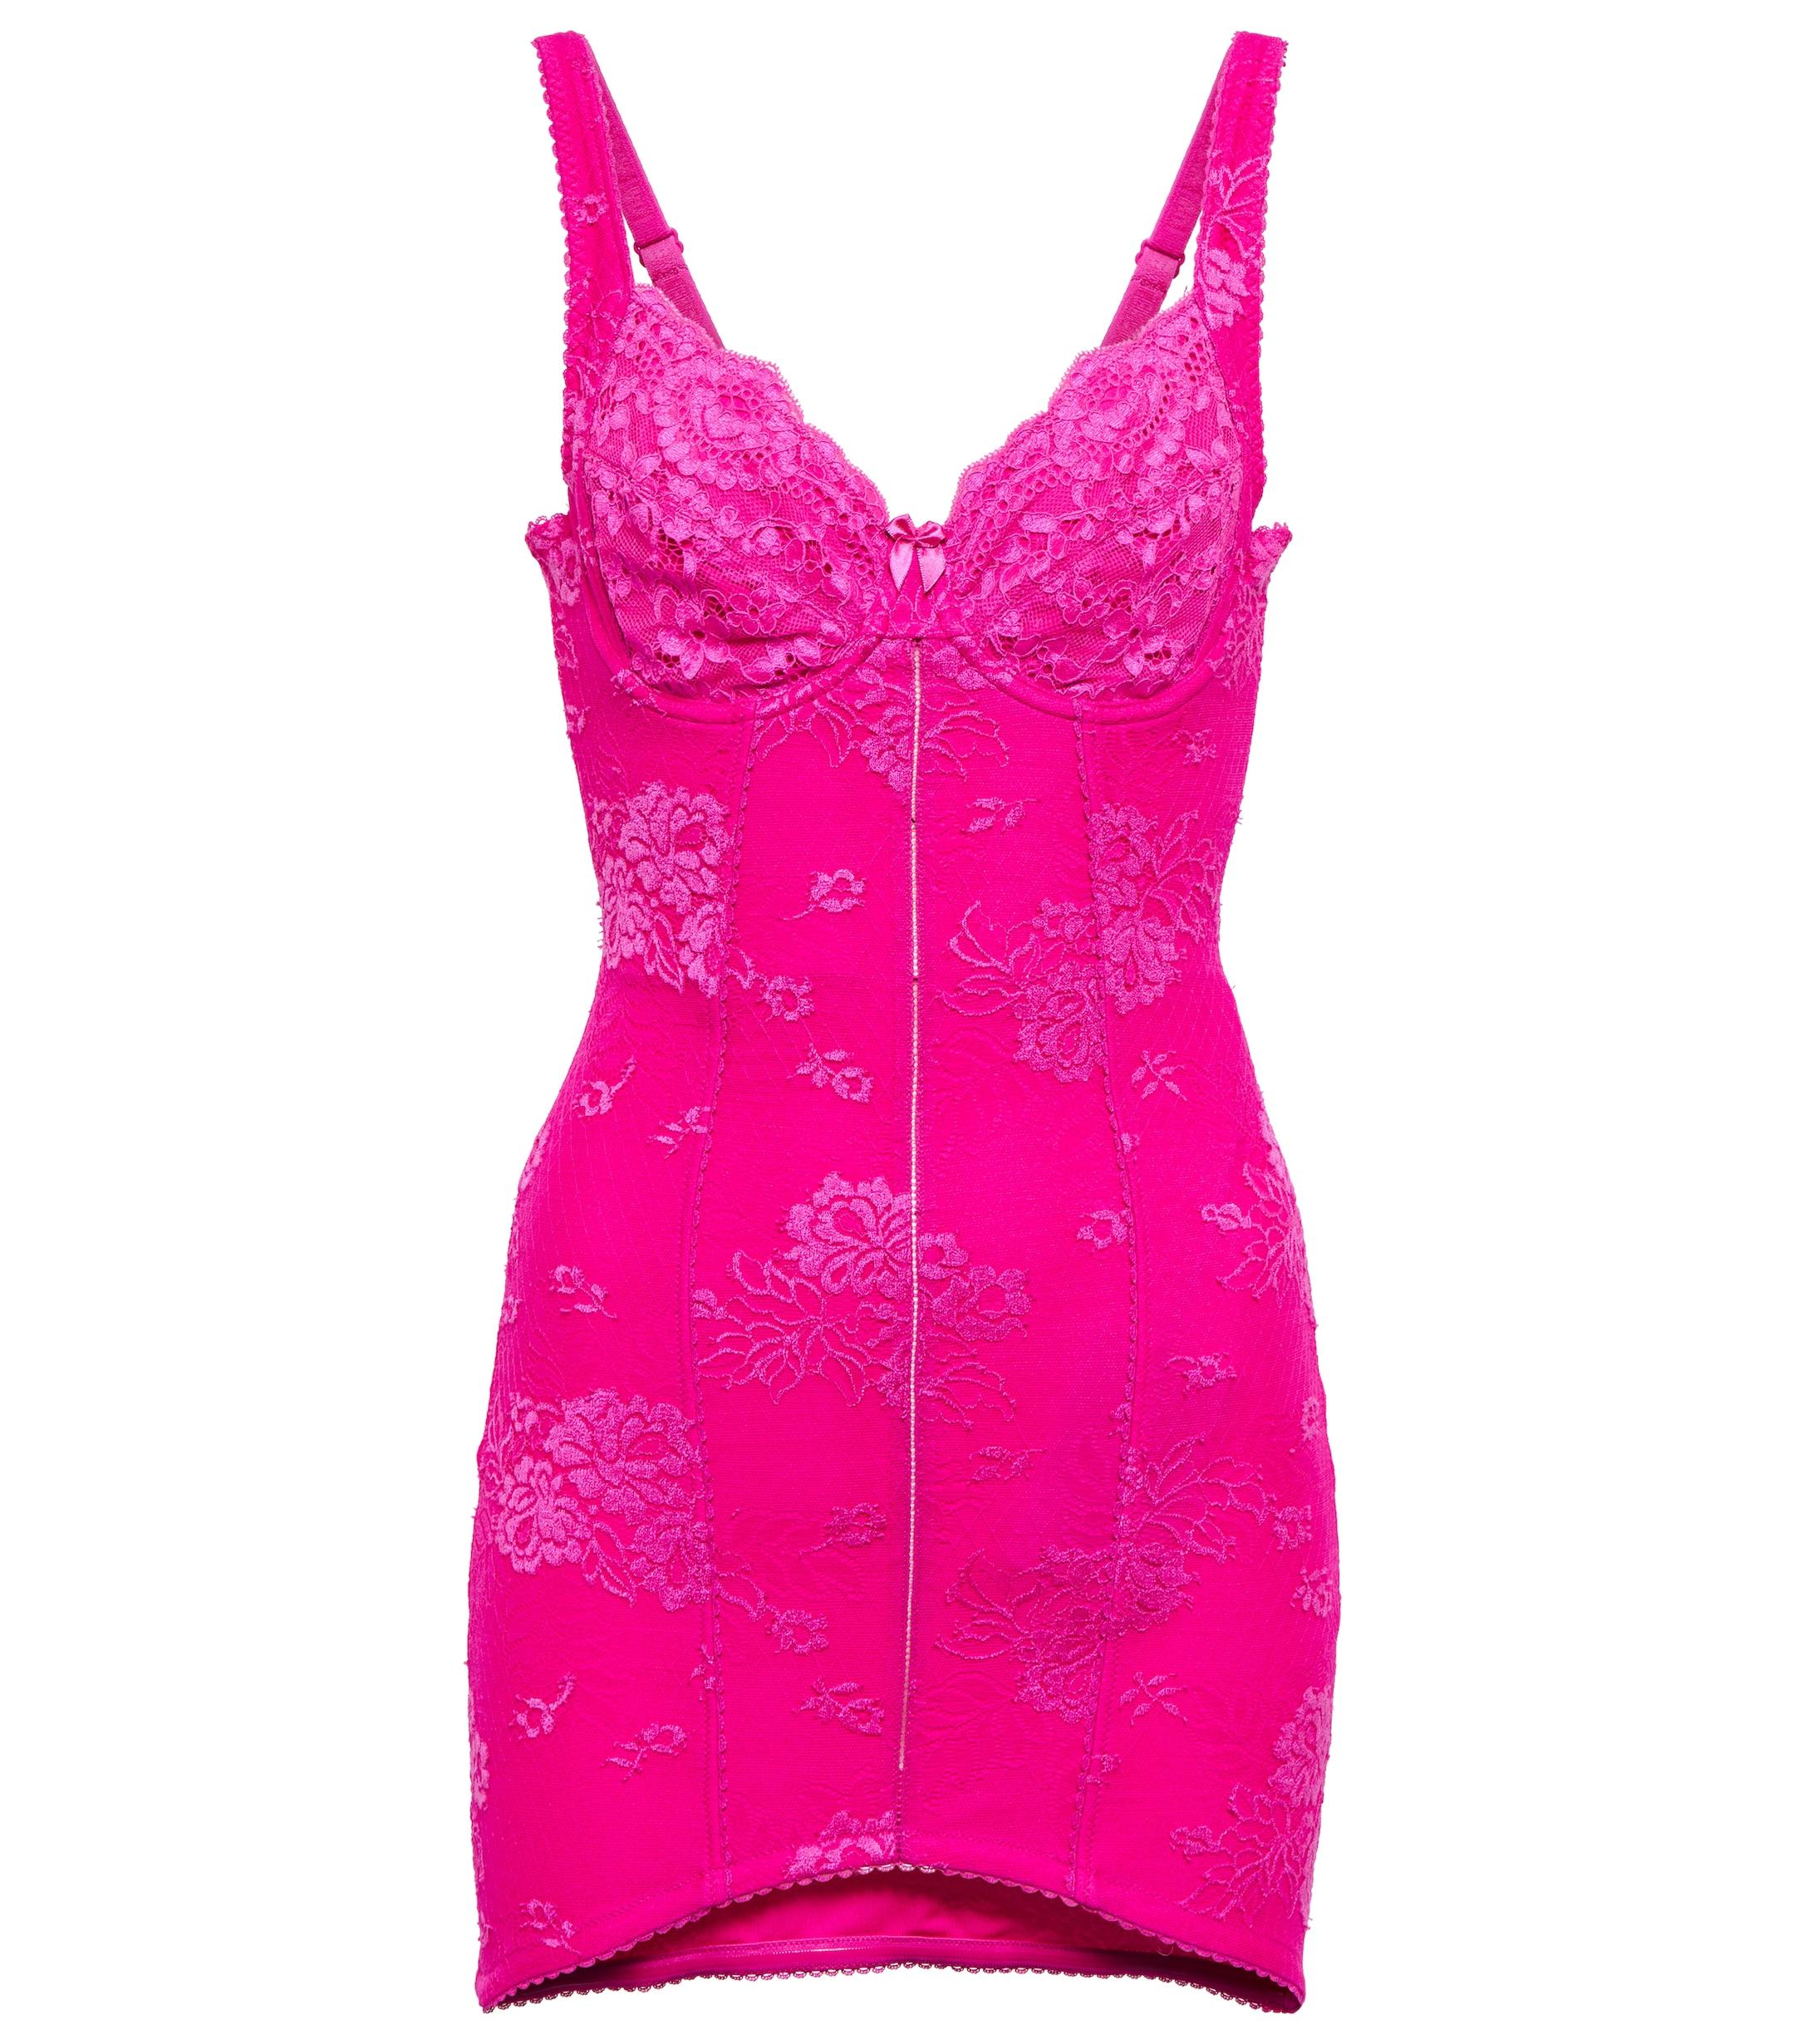 Balenciaga Lingerie Lace Minidress In Pink Lyst 